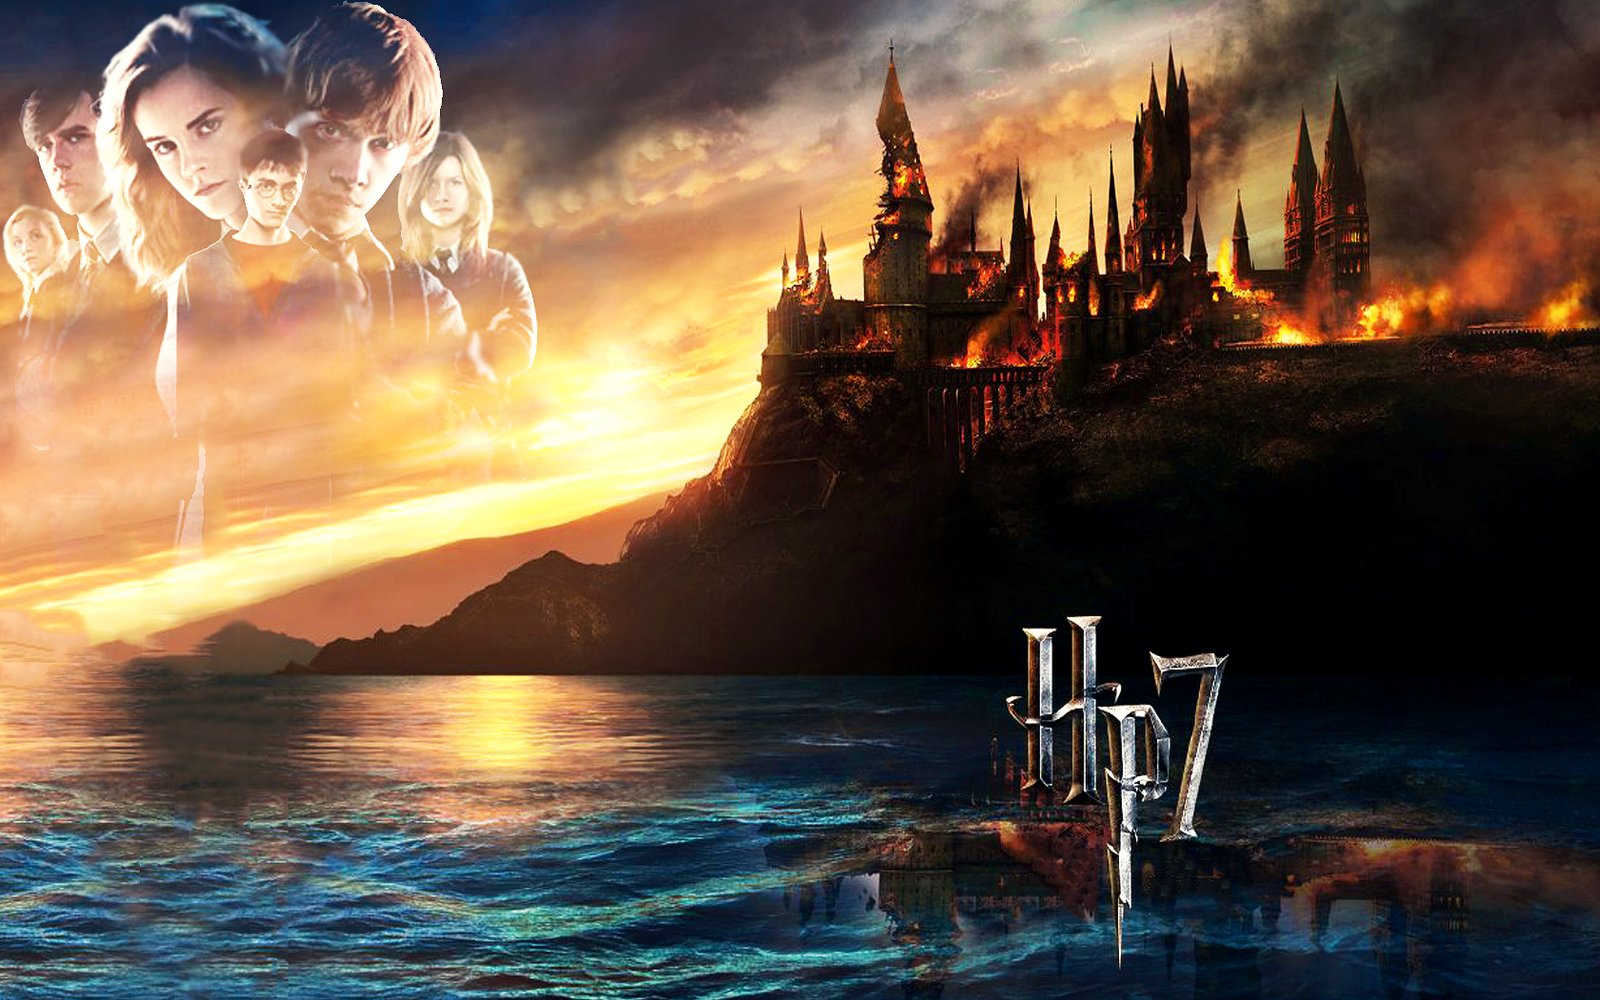 Harry Potter and the Deathly Hallows HD Wallpapers wallpapers hd 1600x1000